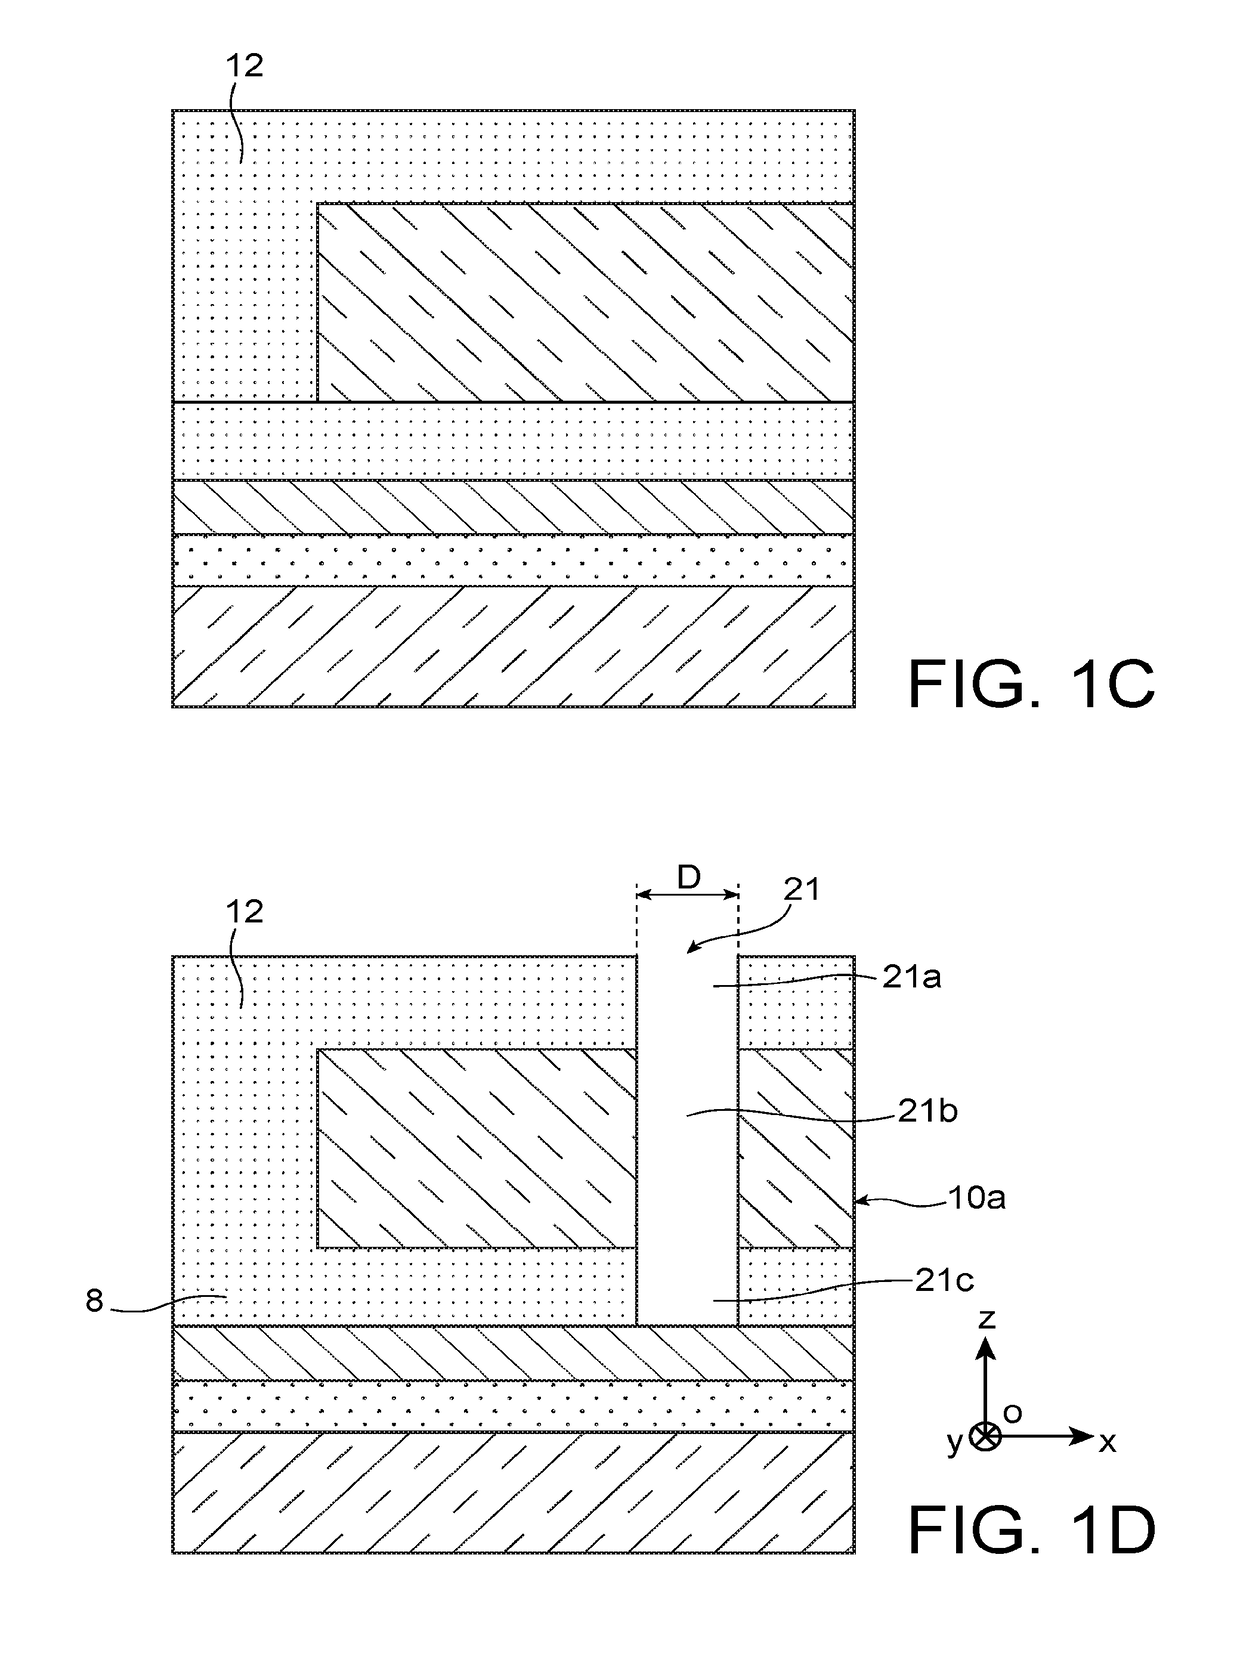 Fabrication of a transistor with a channel structure and semimetal source and drain regions